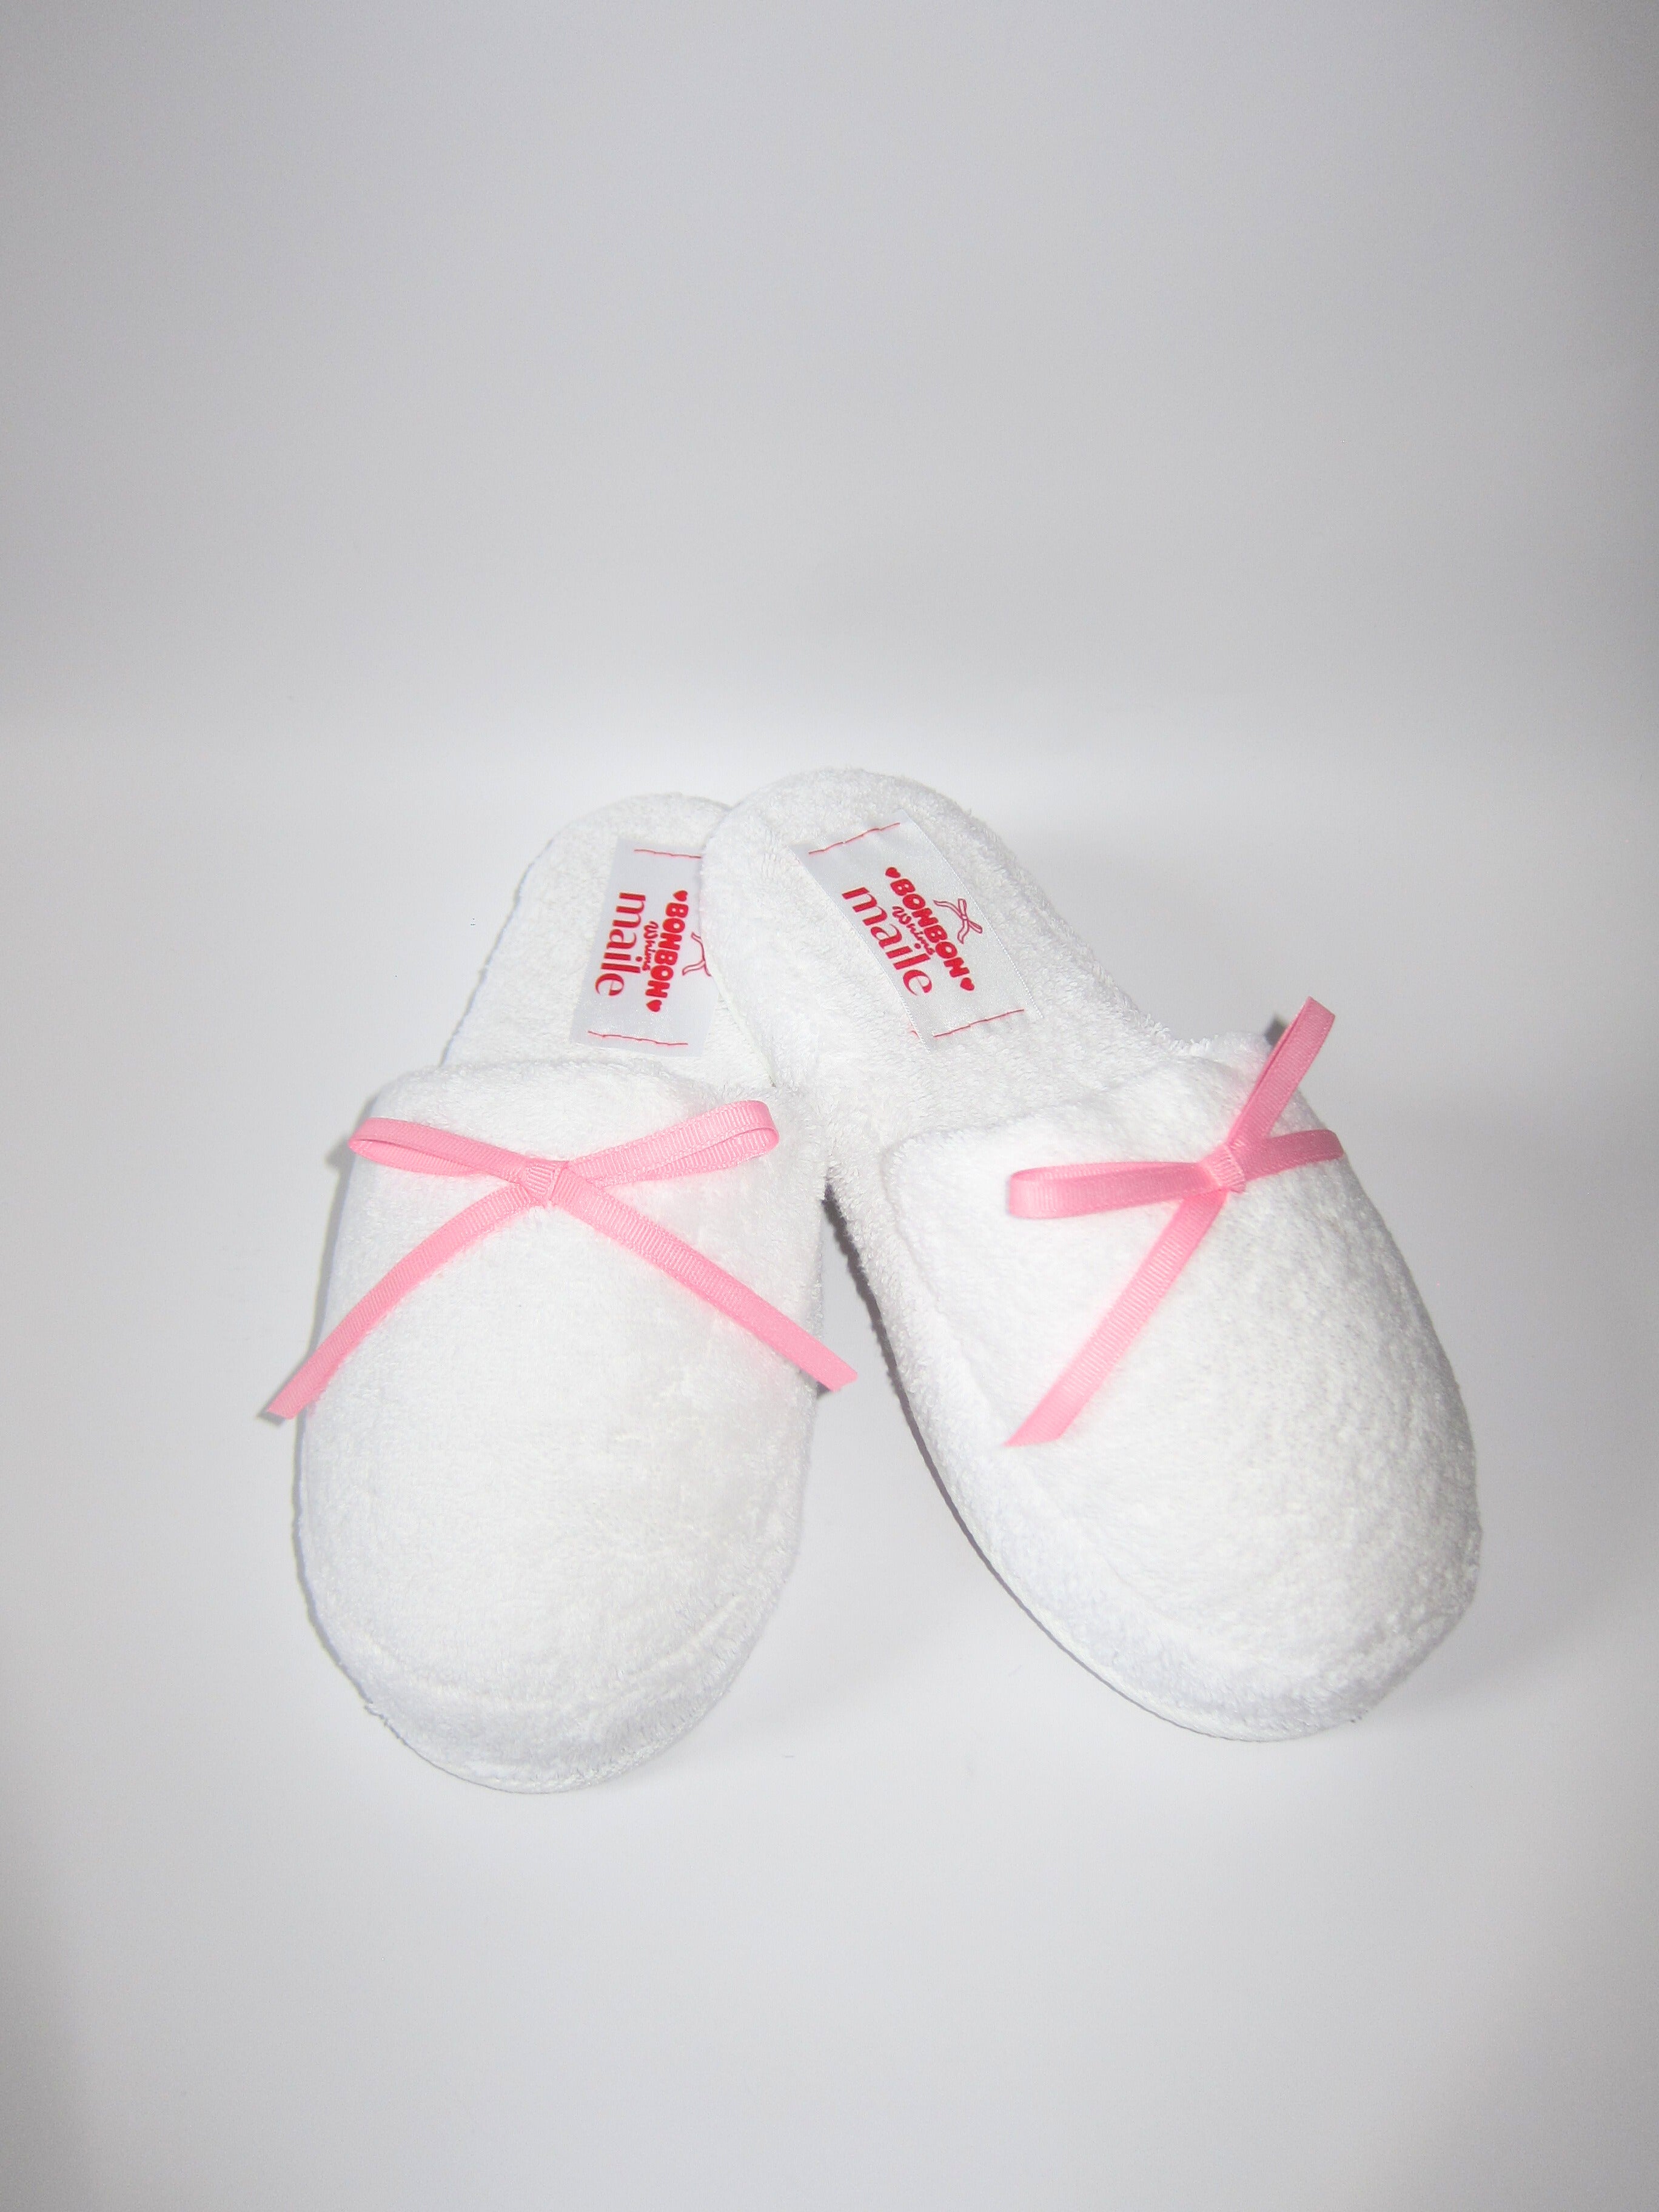 The Candy House Slippers | MAILE X BONBONWHIMS